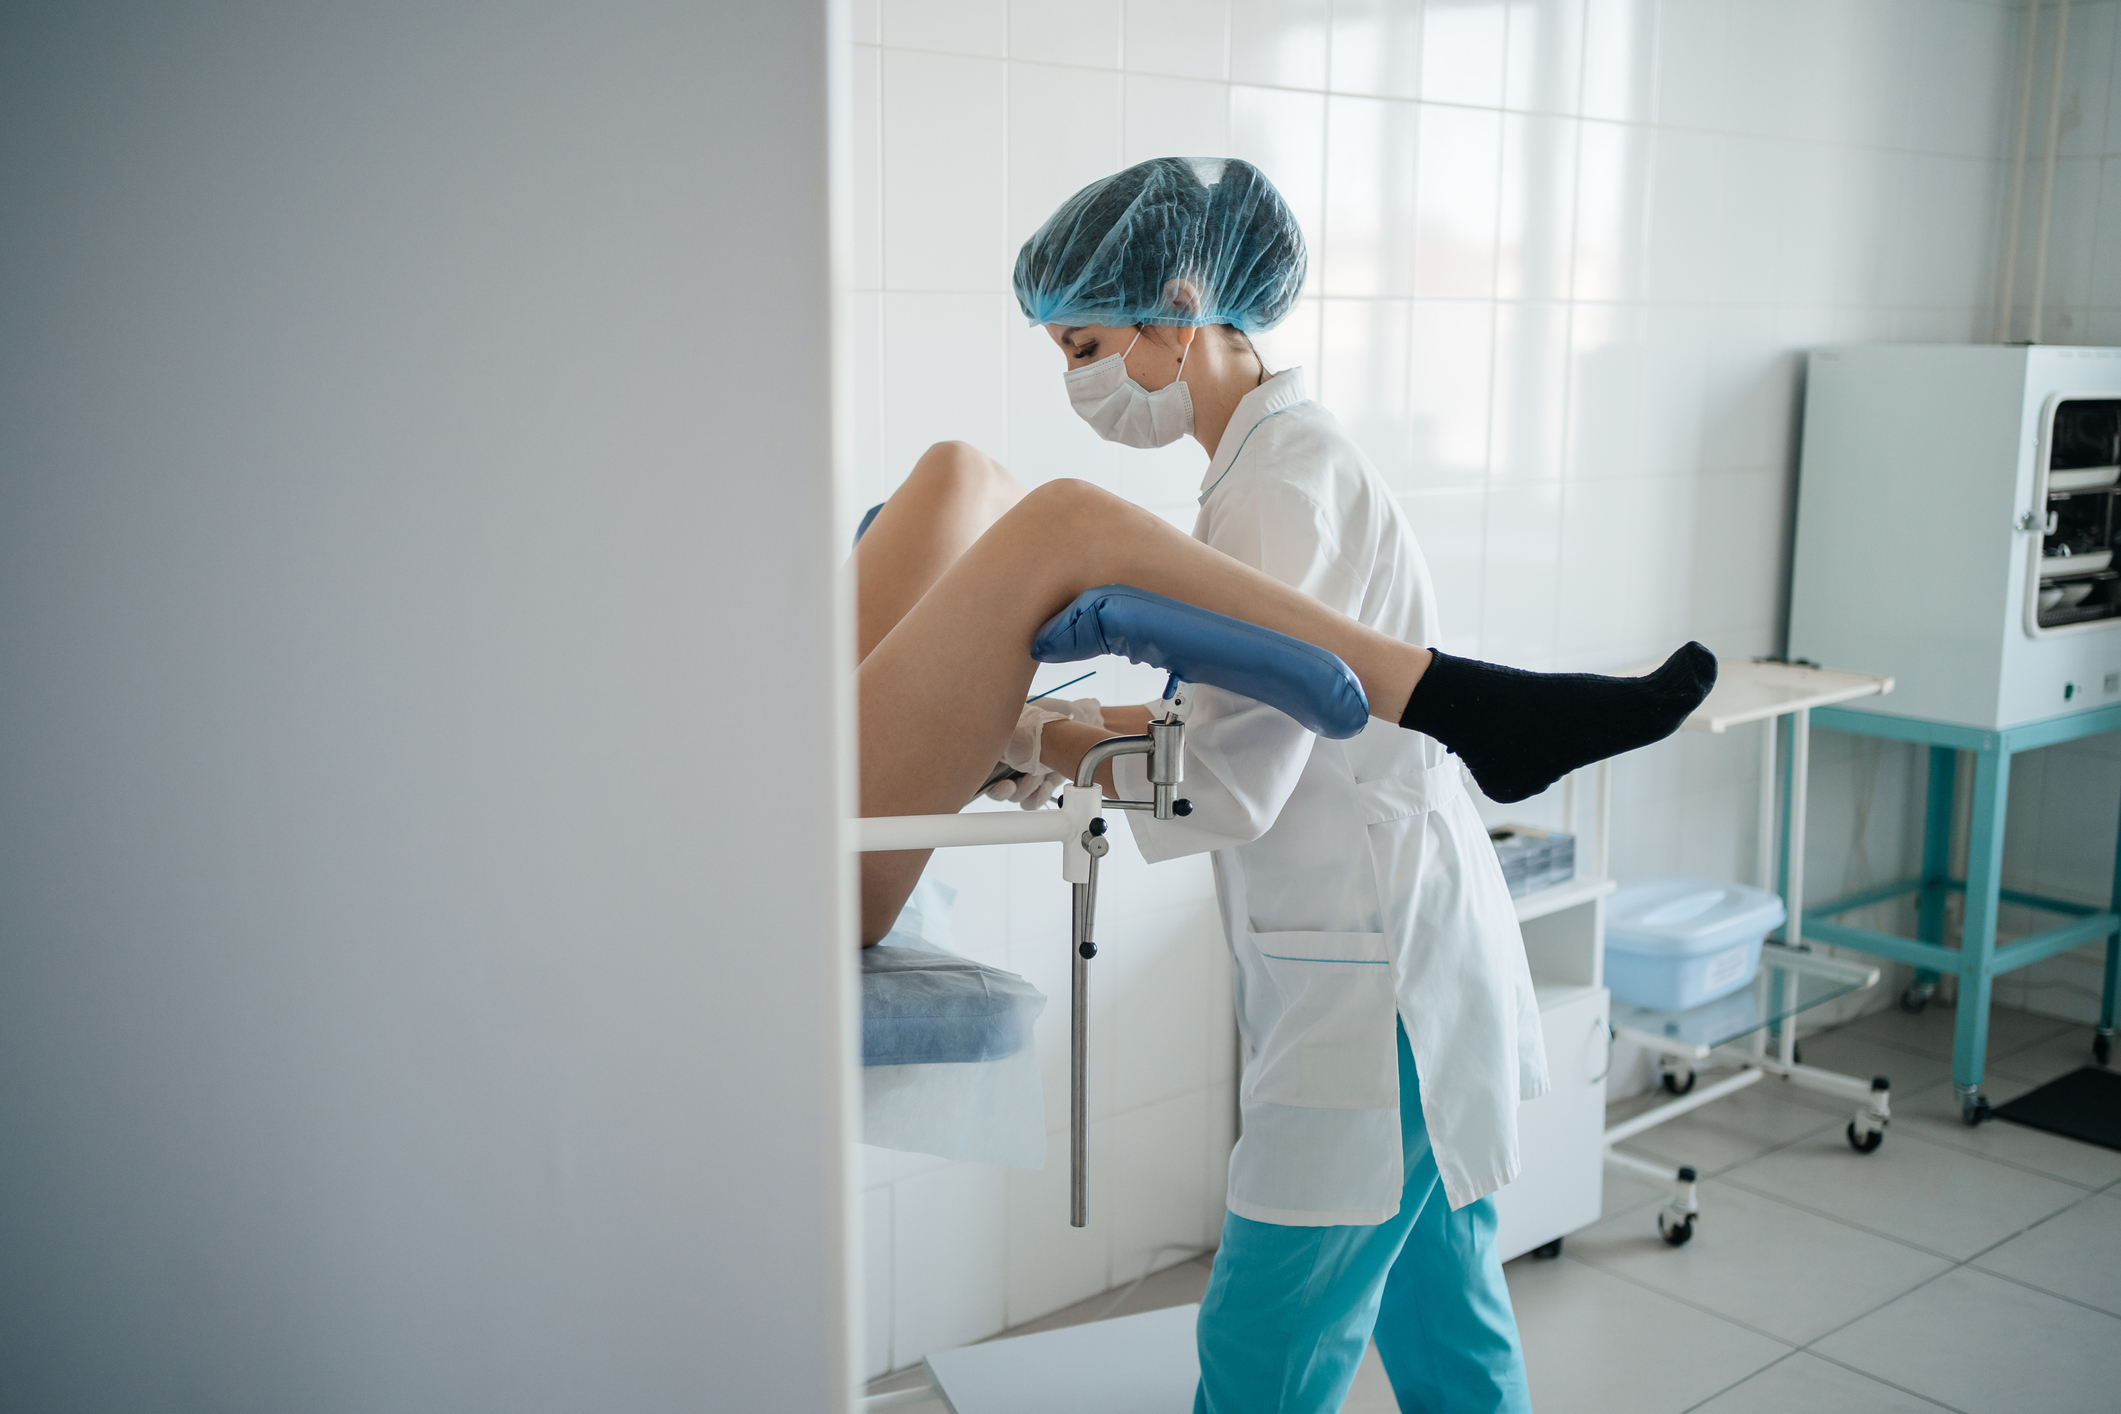 Medical professional conducting a gynecological exam on a patient in a clinic setup